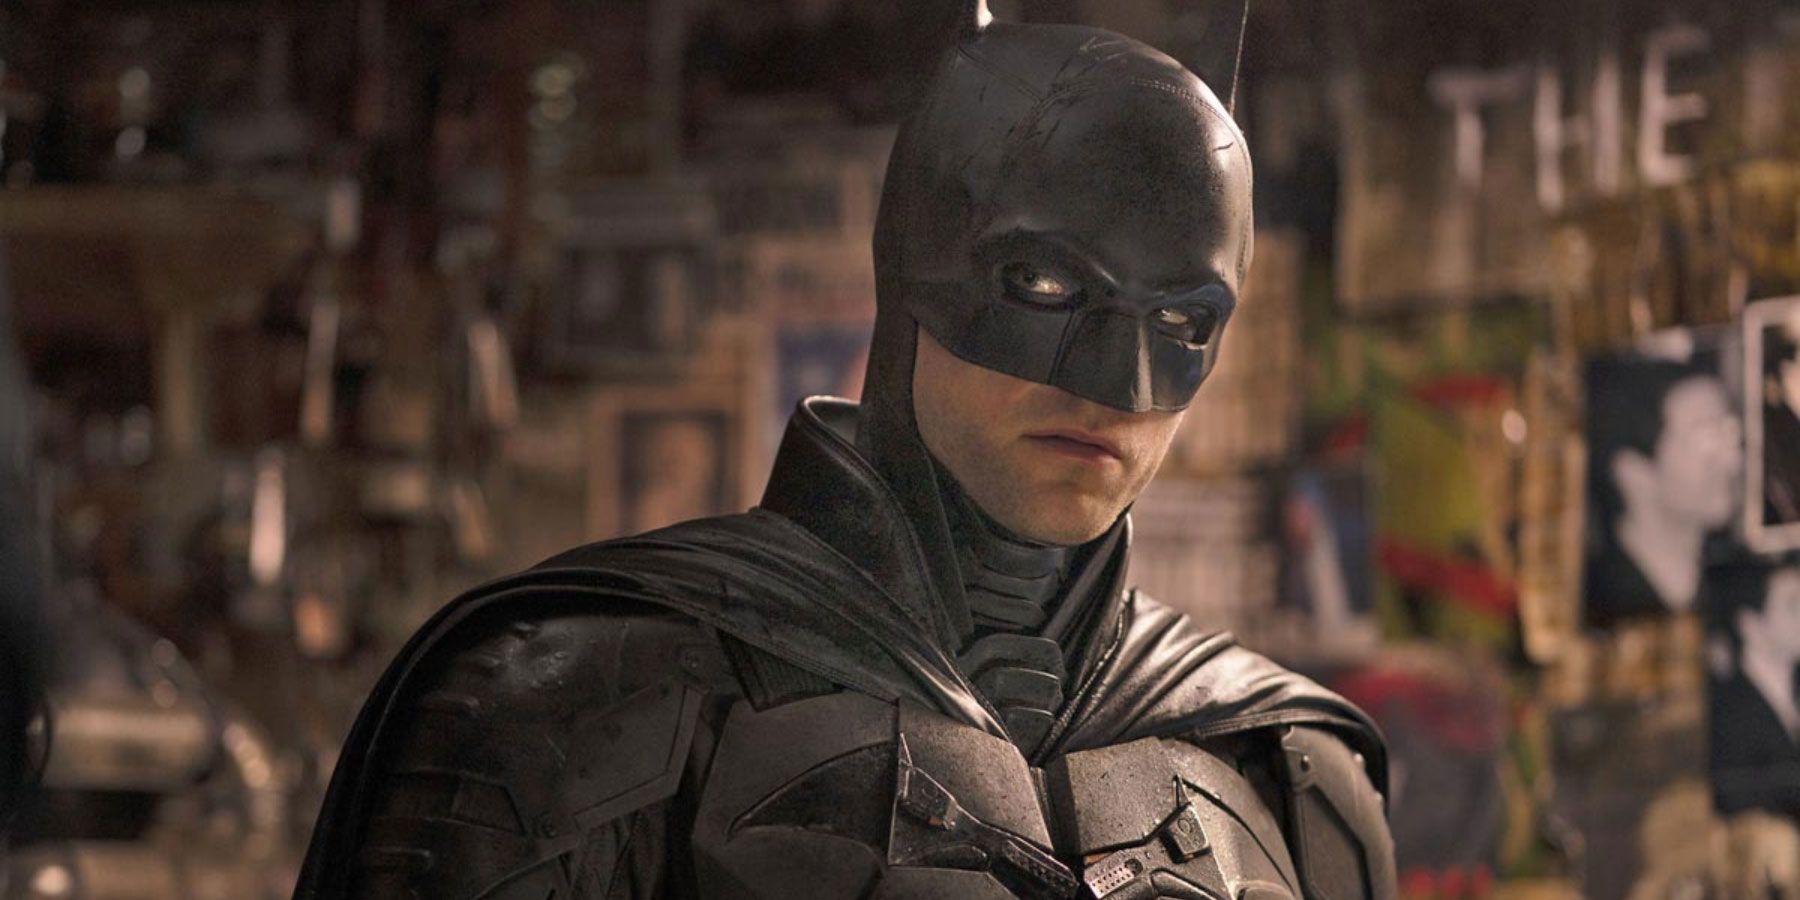 Robert Pattinson May Appear In Penguins Show But Not As Batman